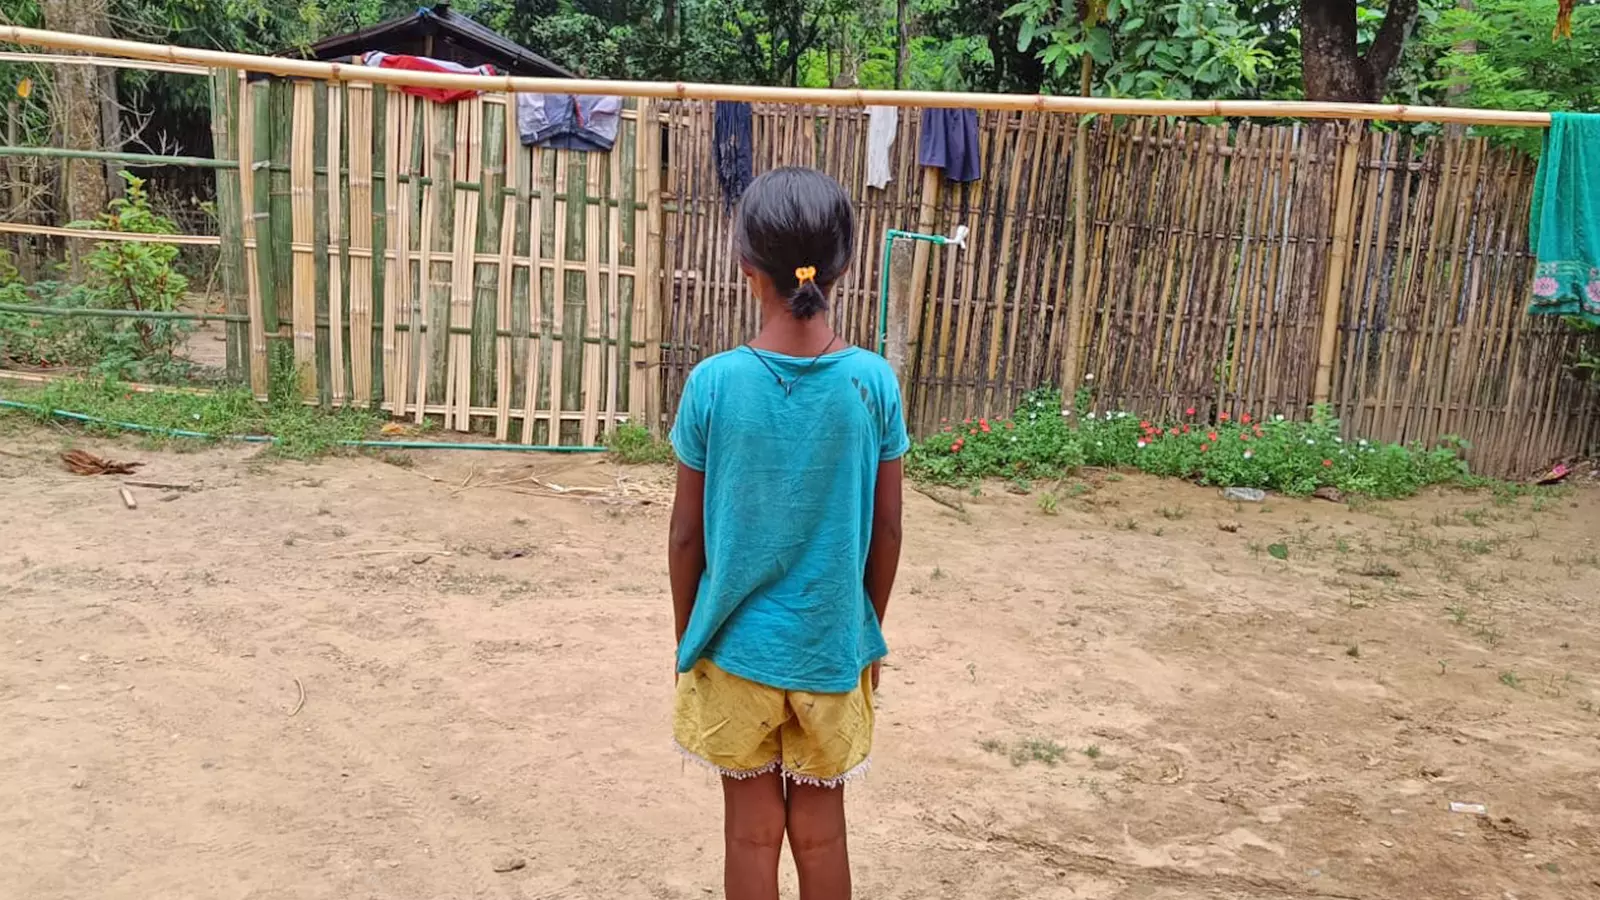 Sonia Rajbongshi (name changed), 12, who grew up in Assams Beesakopie tea estate was trafficked to Arunachal Pradeshs Bomdila this year. She was working as a domestic help before she was rescued by the Assam Police.